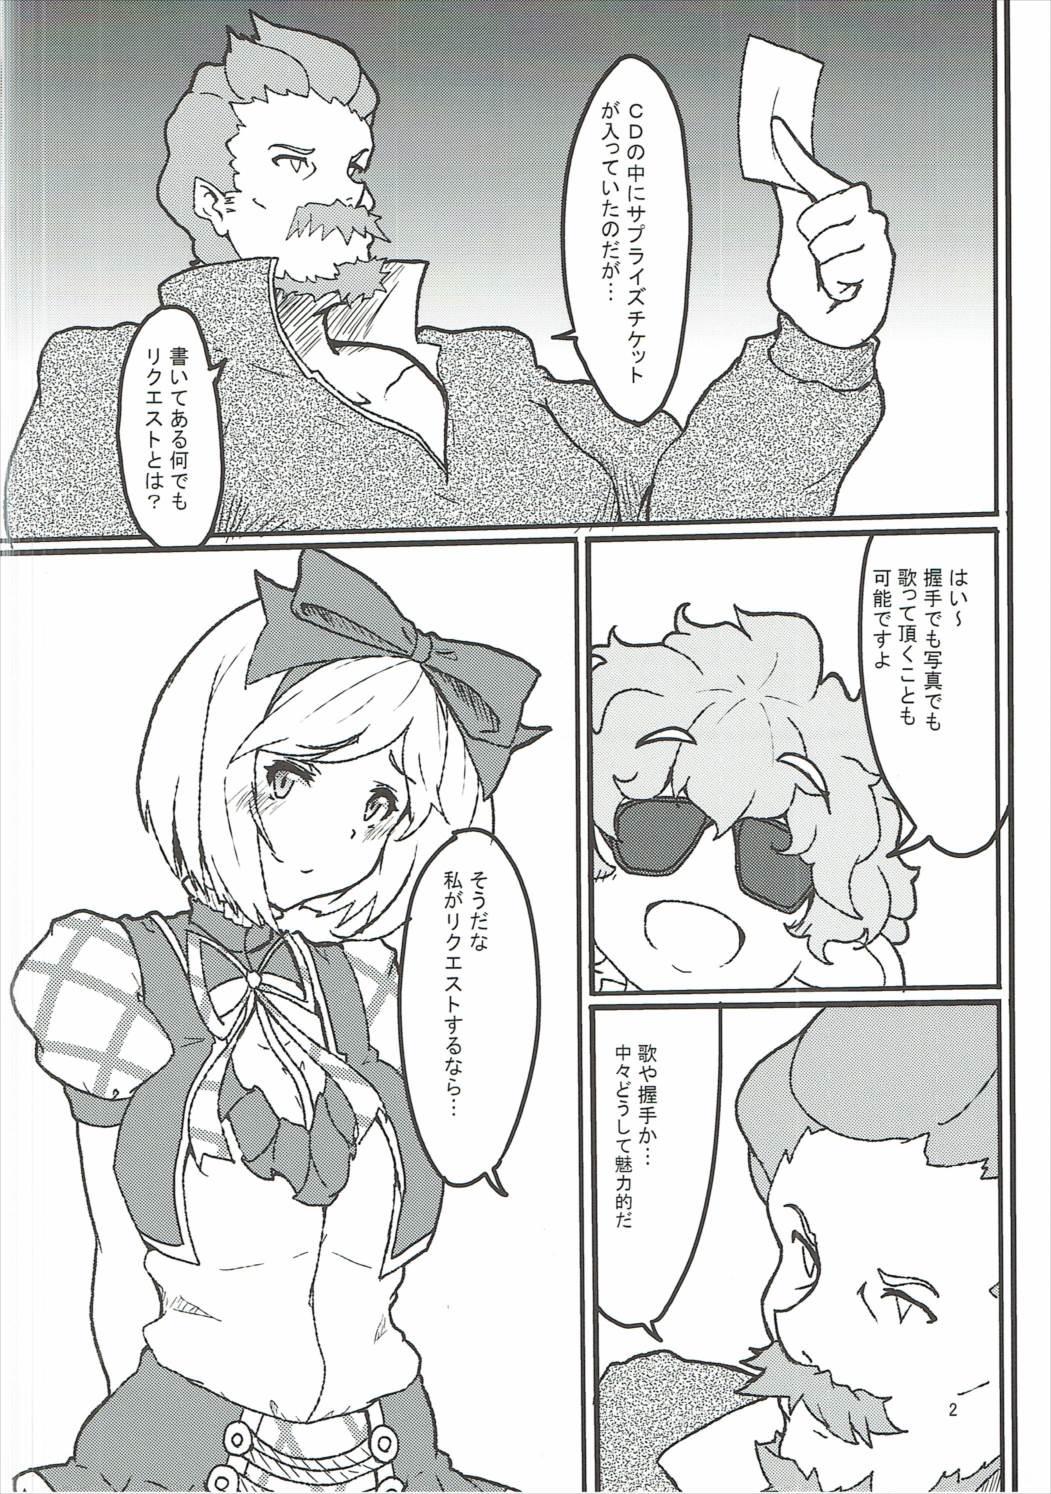 Russian Surprise Ticket - Granblue fantasy Squirt - Page 3